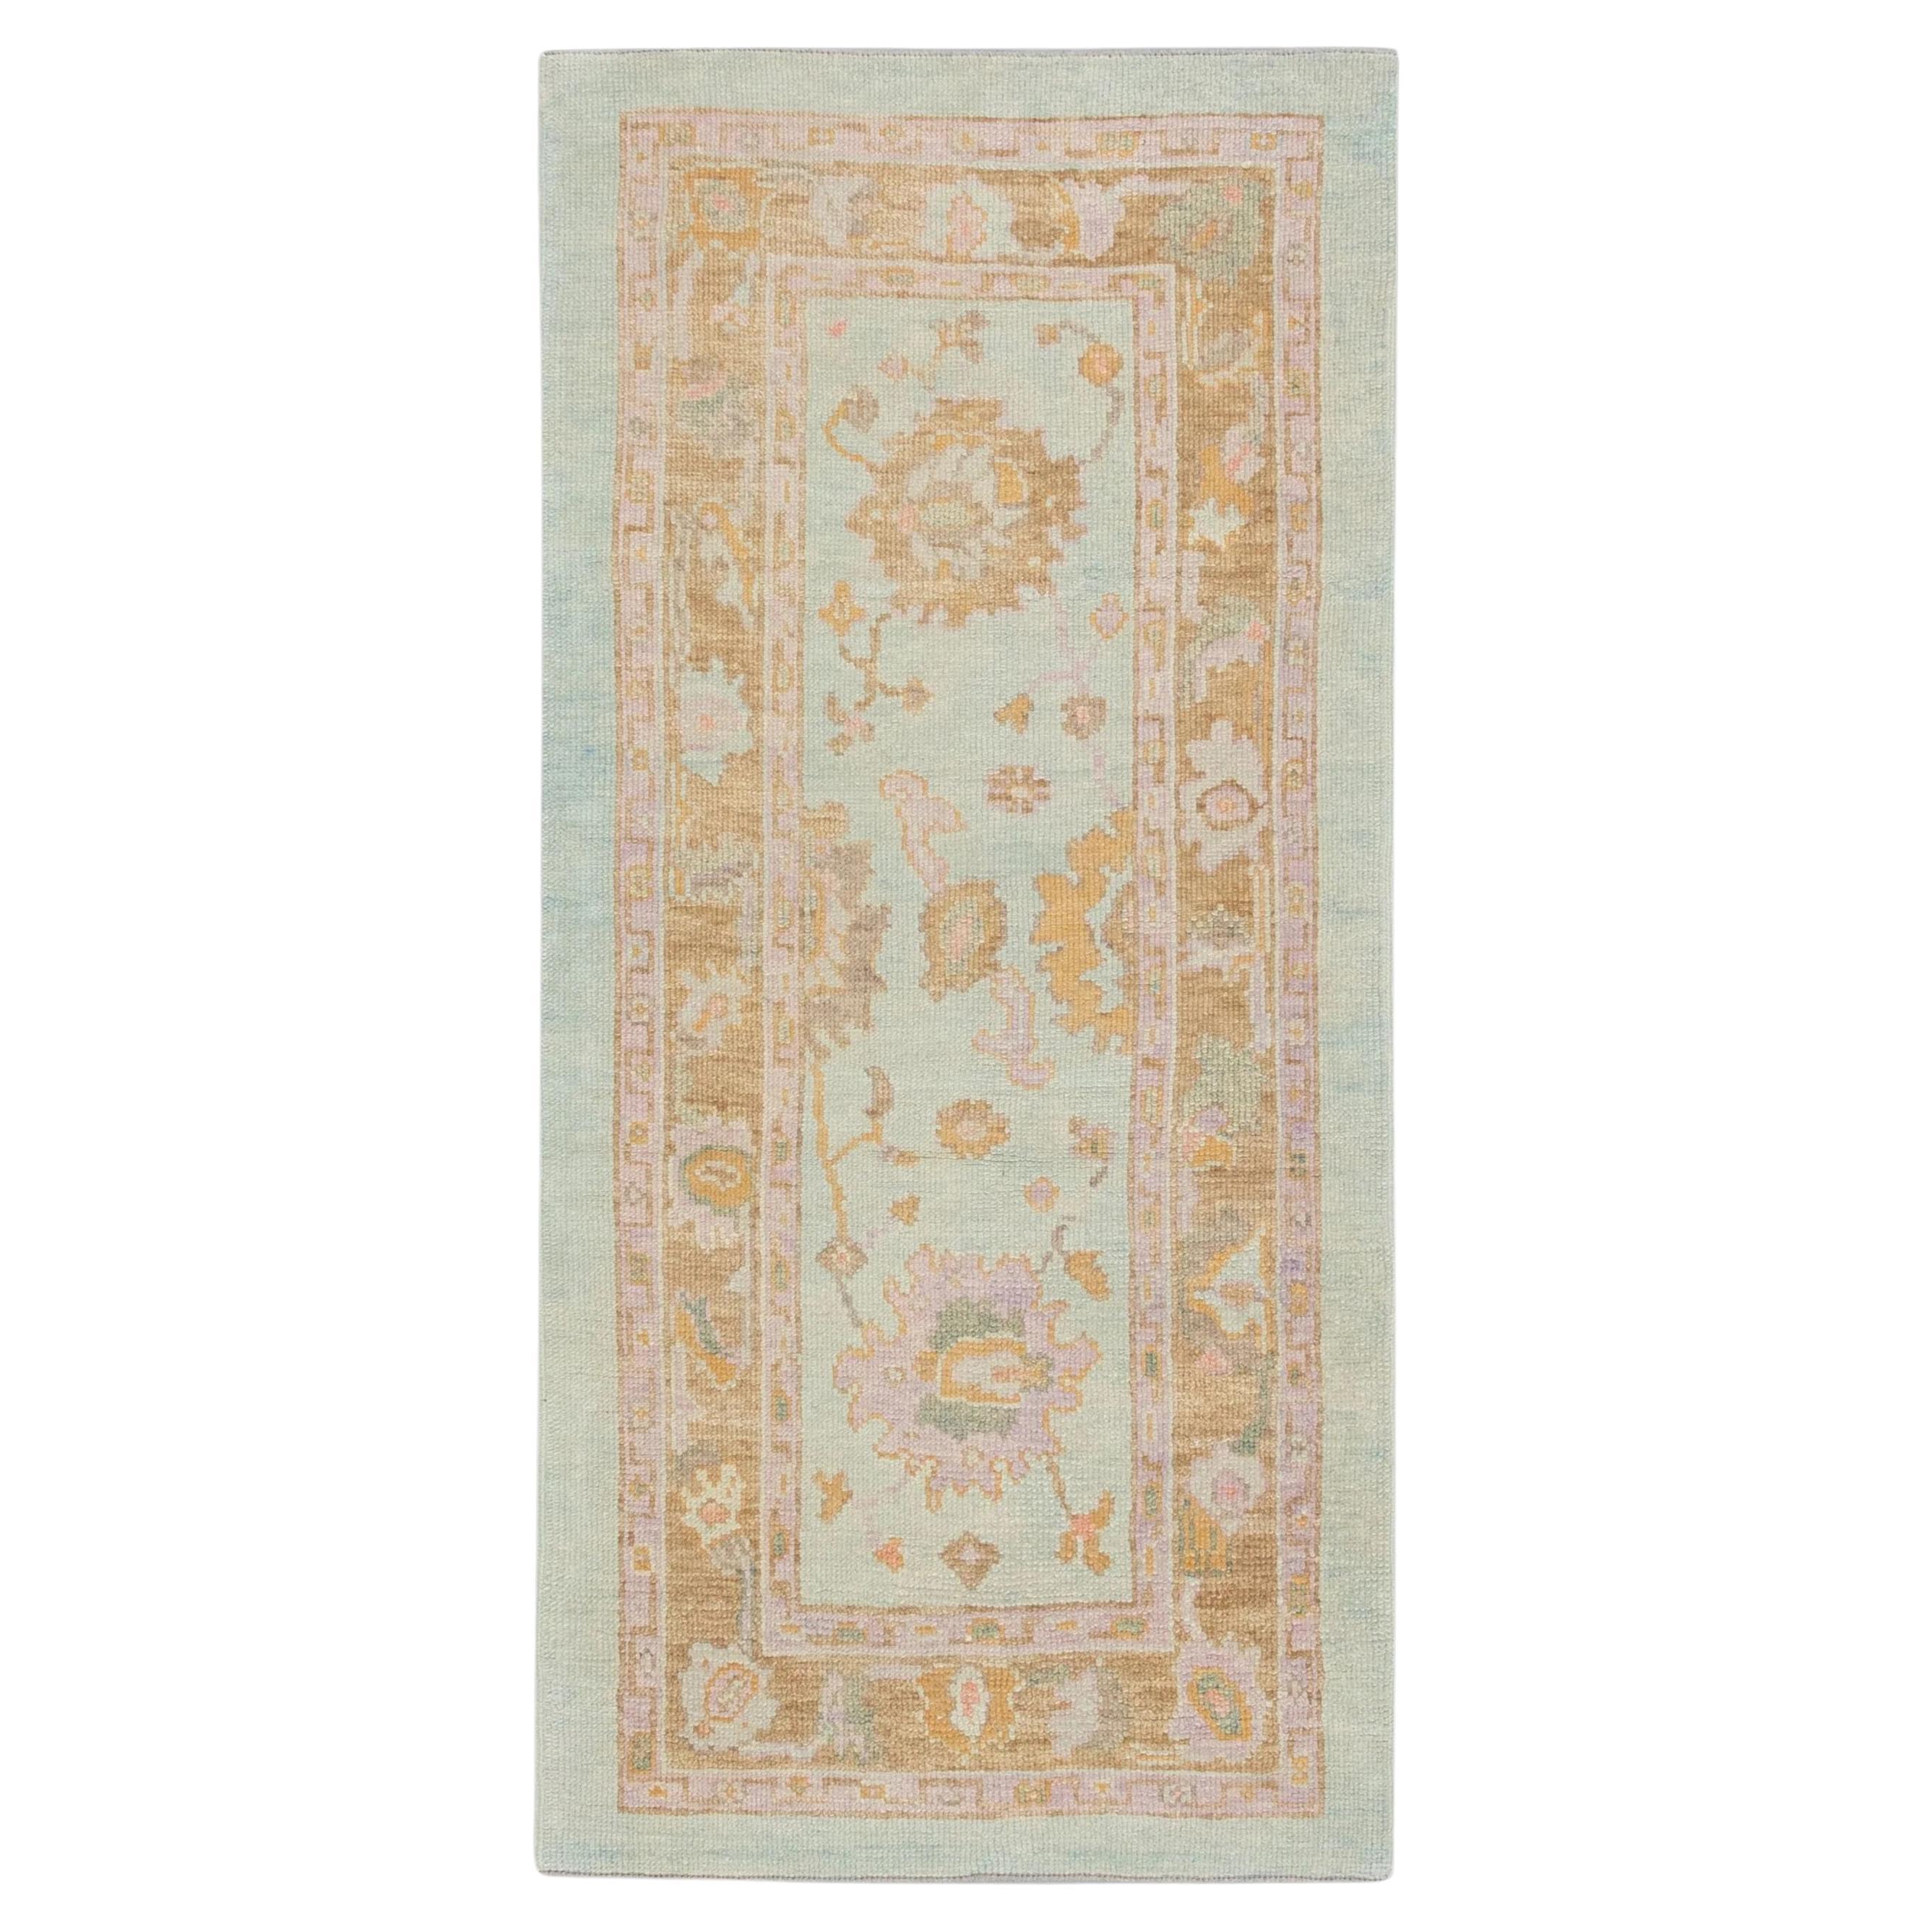 Soft Blue Handwoven Wool Turkish Oushak Rug with Colorful Floral Design 3' x 6'3 For Sale